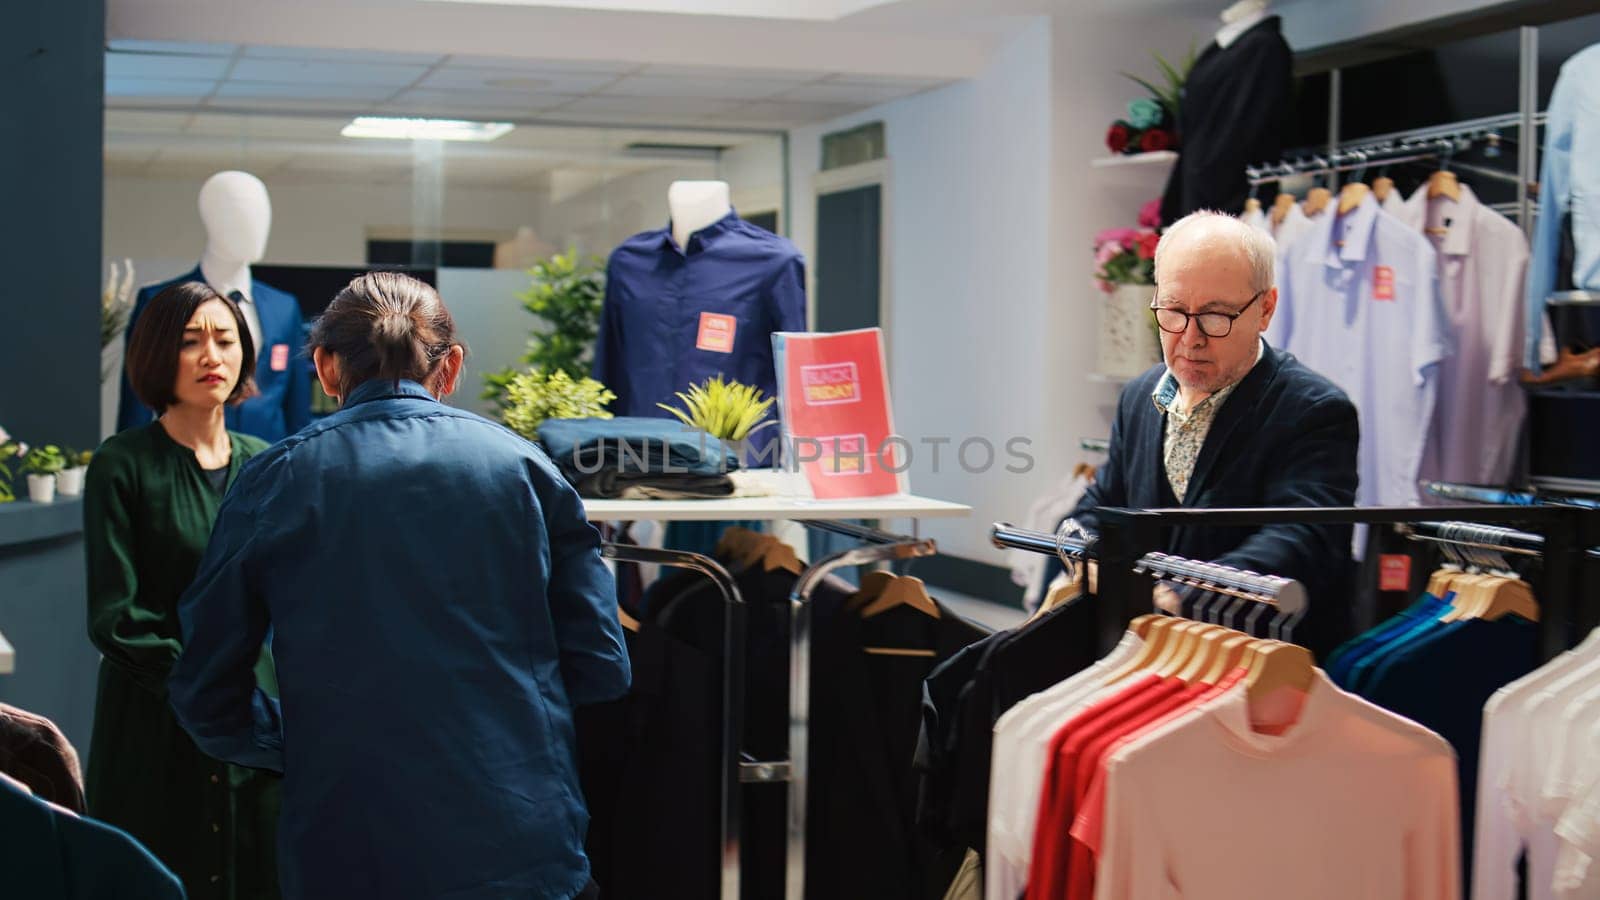 Customers choosing clothes from racks while doing purchases in fashion center during black friday discounts. Diverse obsessed people looking through clothing items on clearance, shopping.